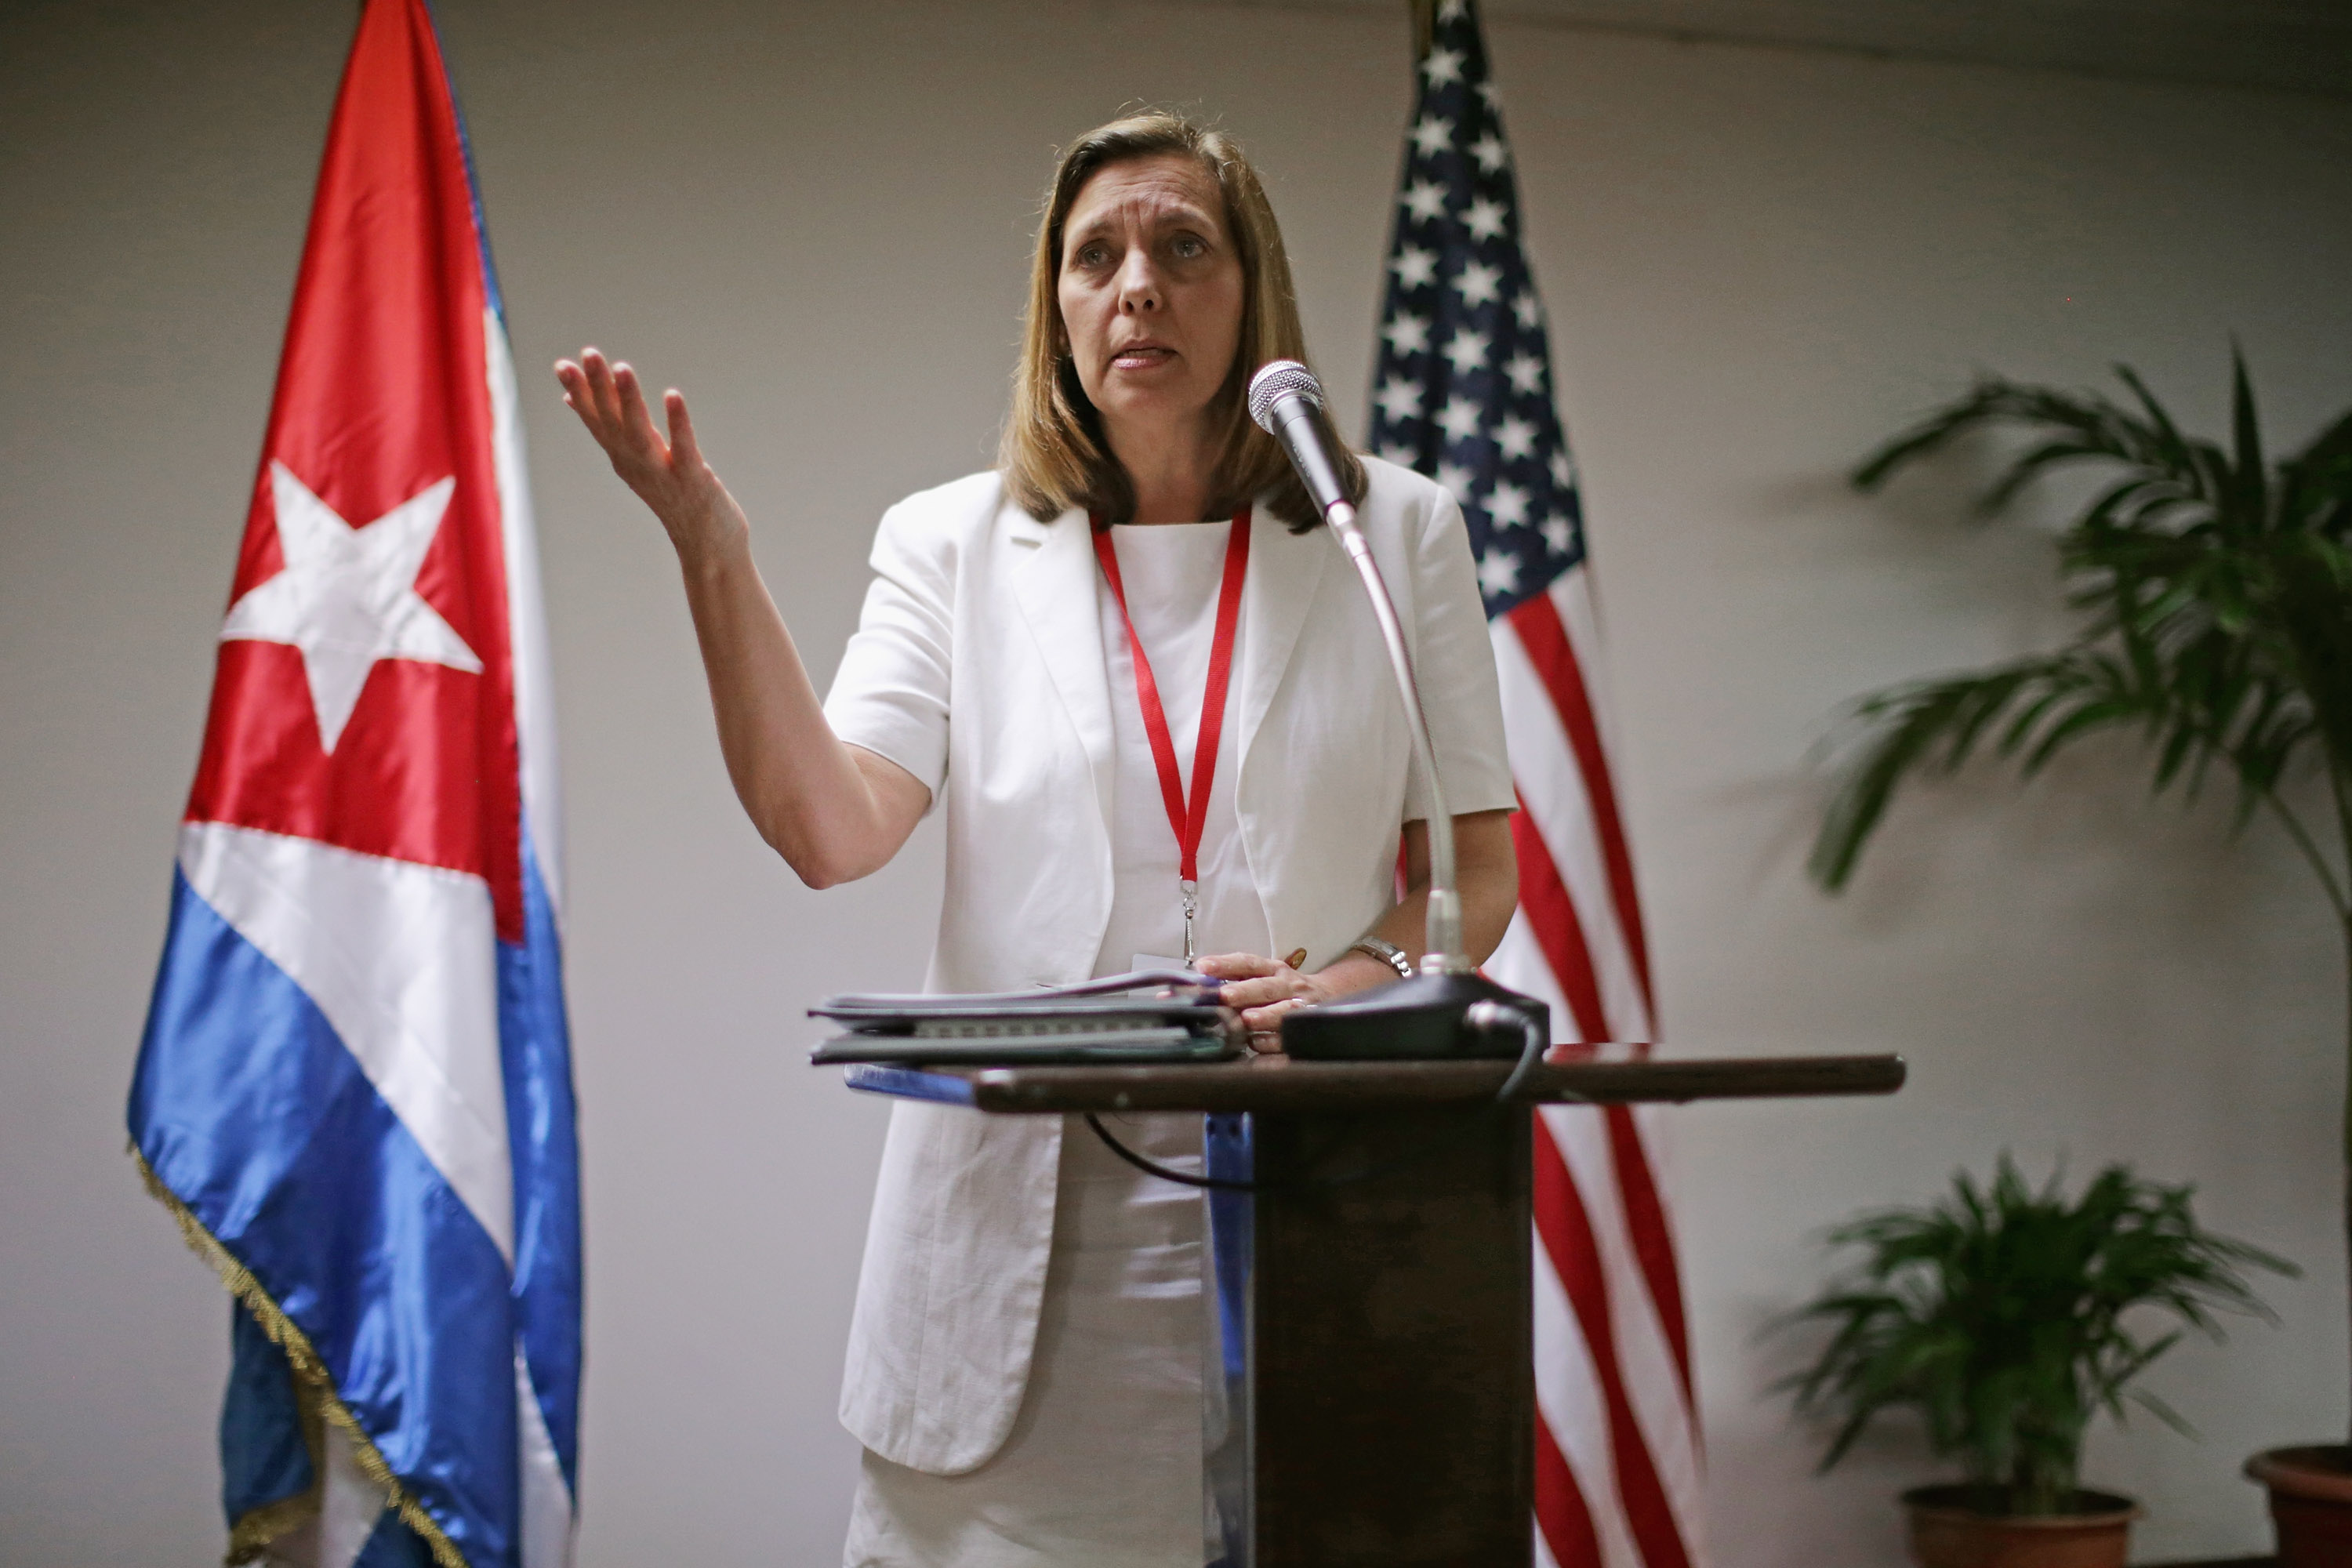 Cuban Foreign Ministry director for North America Josefina Vidal delivers brief remarks to the news media in Havana on Jan. 22, 2015 (Chip Somodevilla—Getty Images)